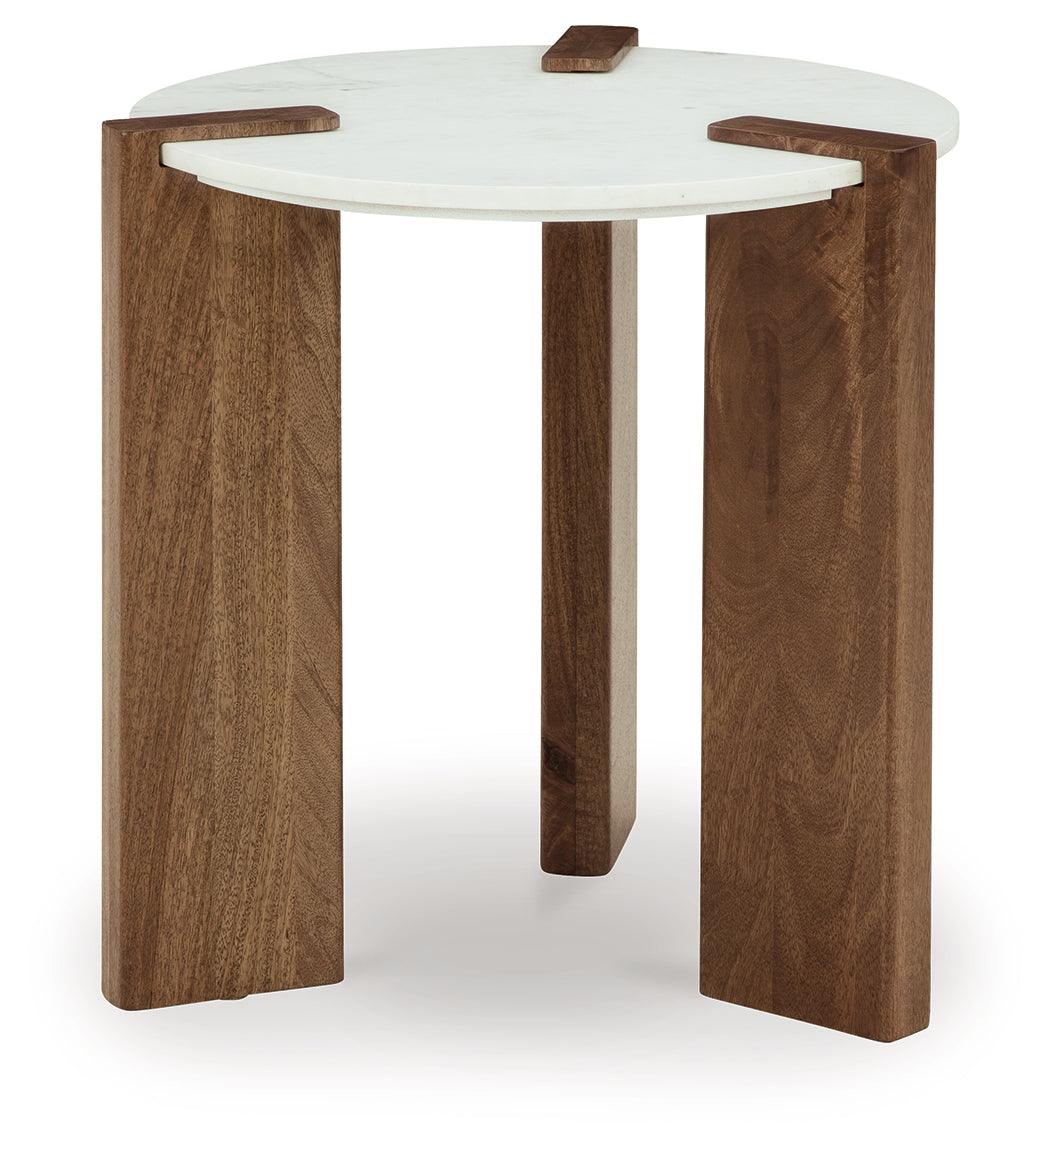 Isanti White/brown Coffee Table With 2 End Tables - Ella Furniture